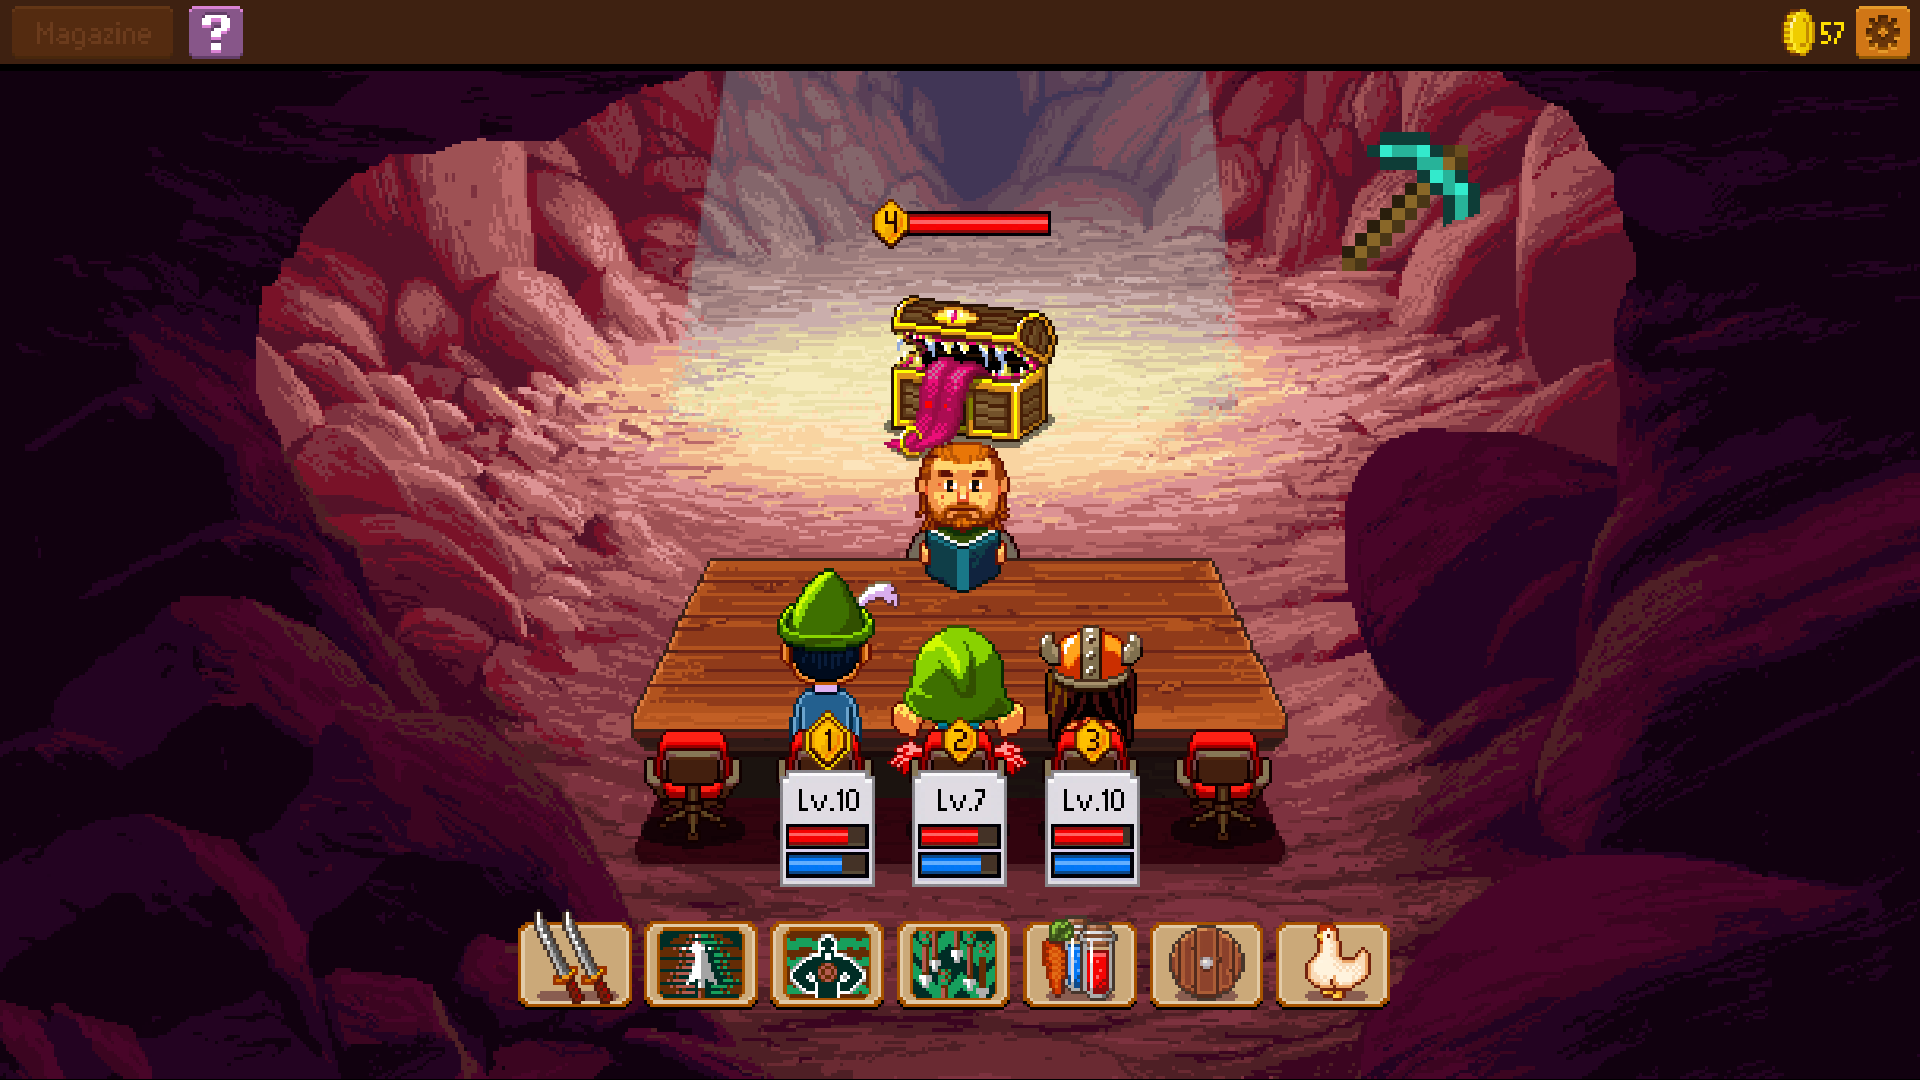 Knights of Pen and Paper 2 (screenshot 5)